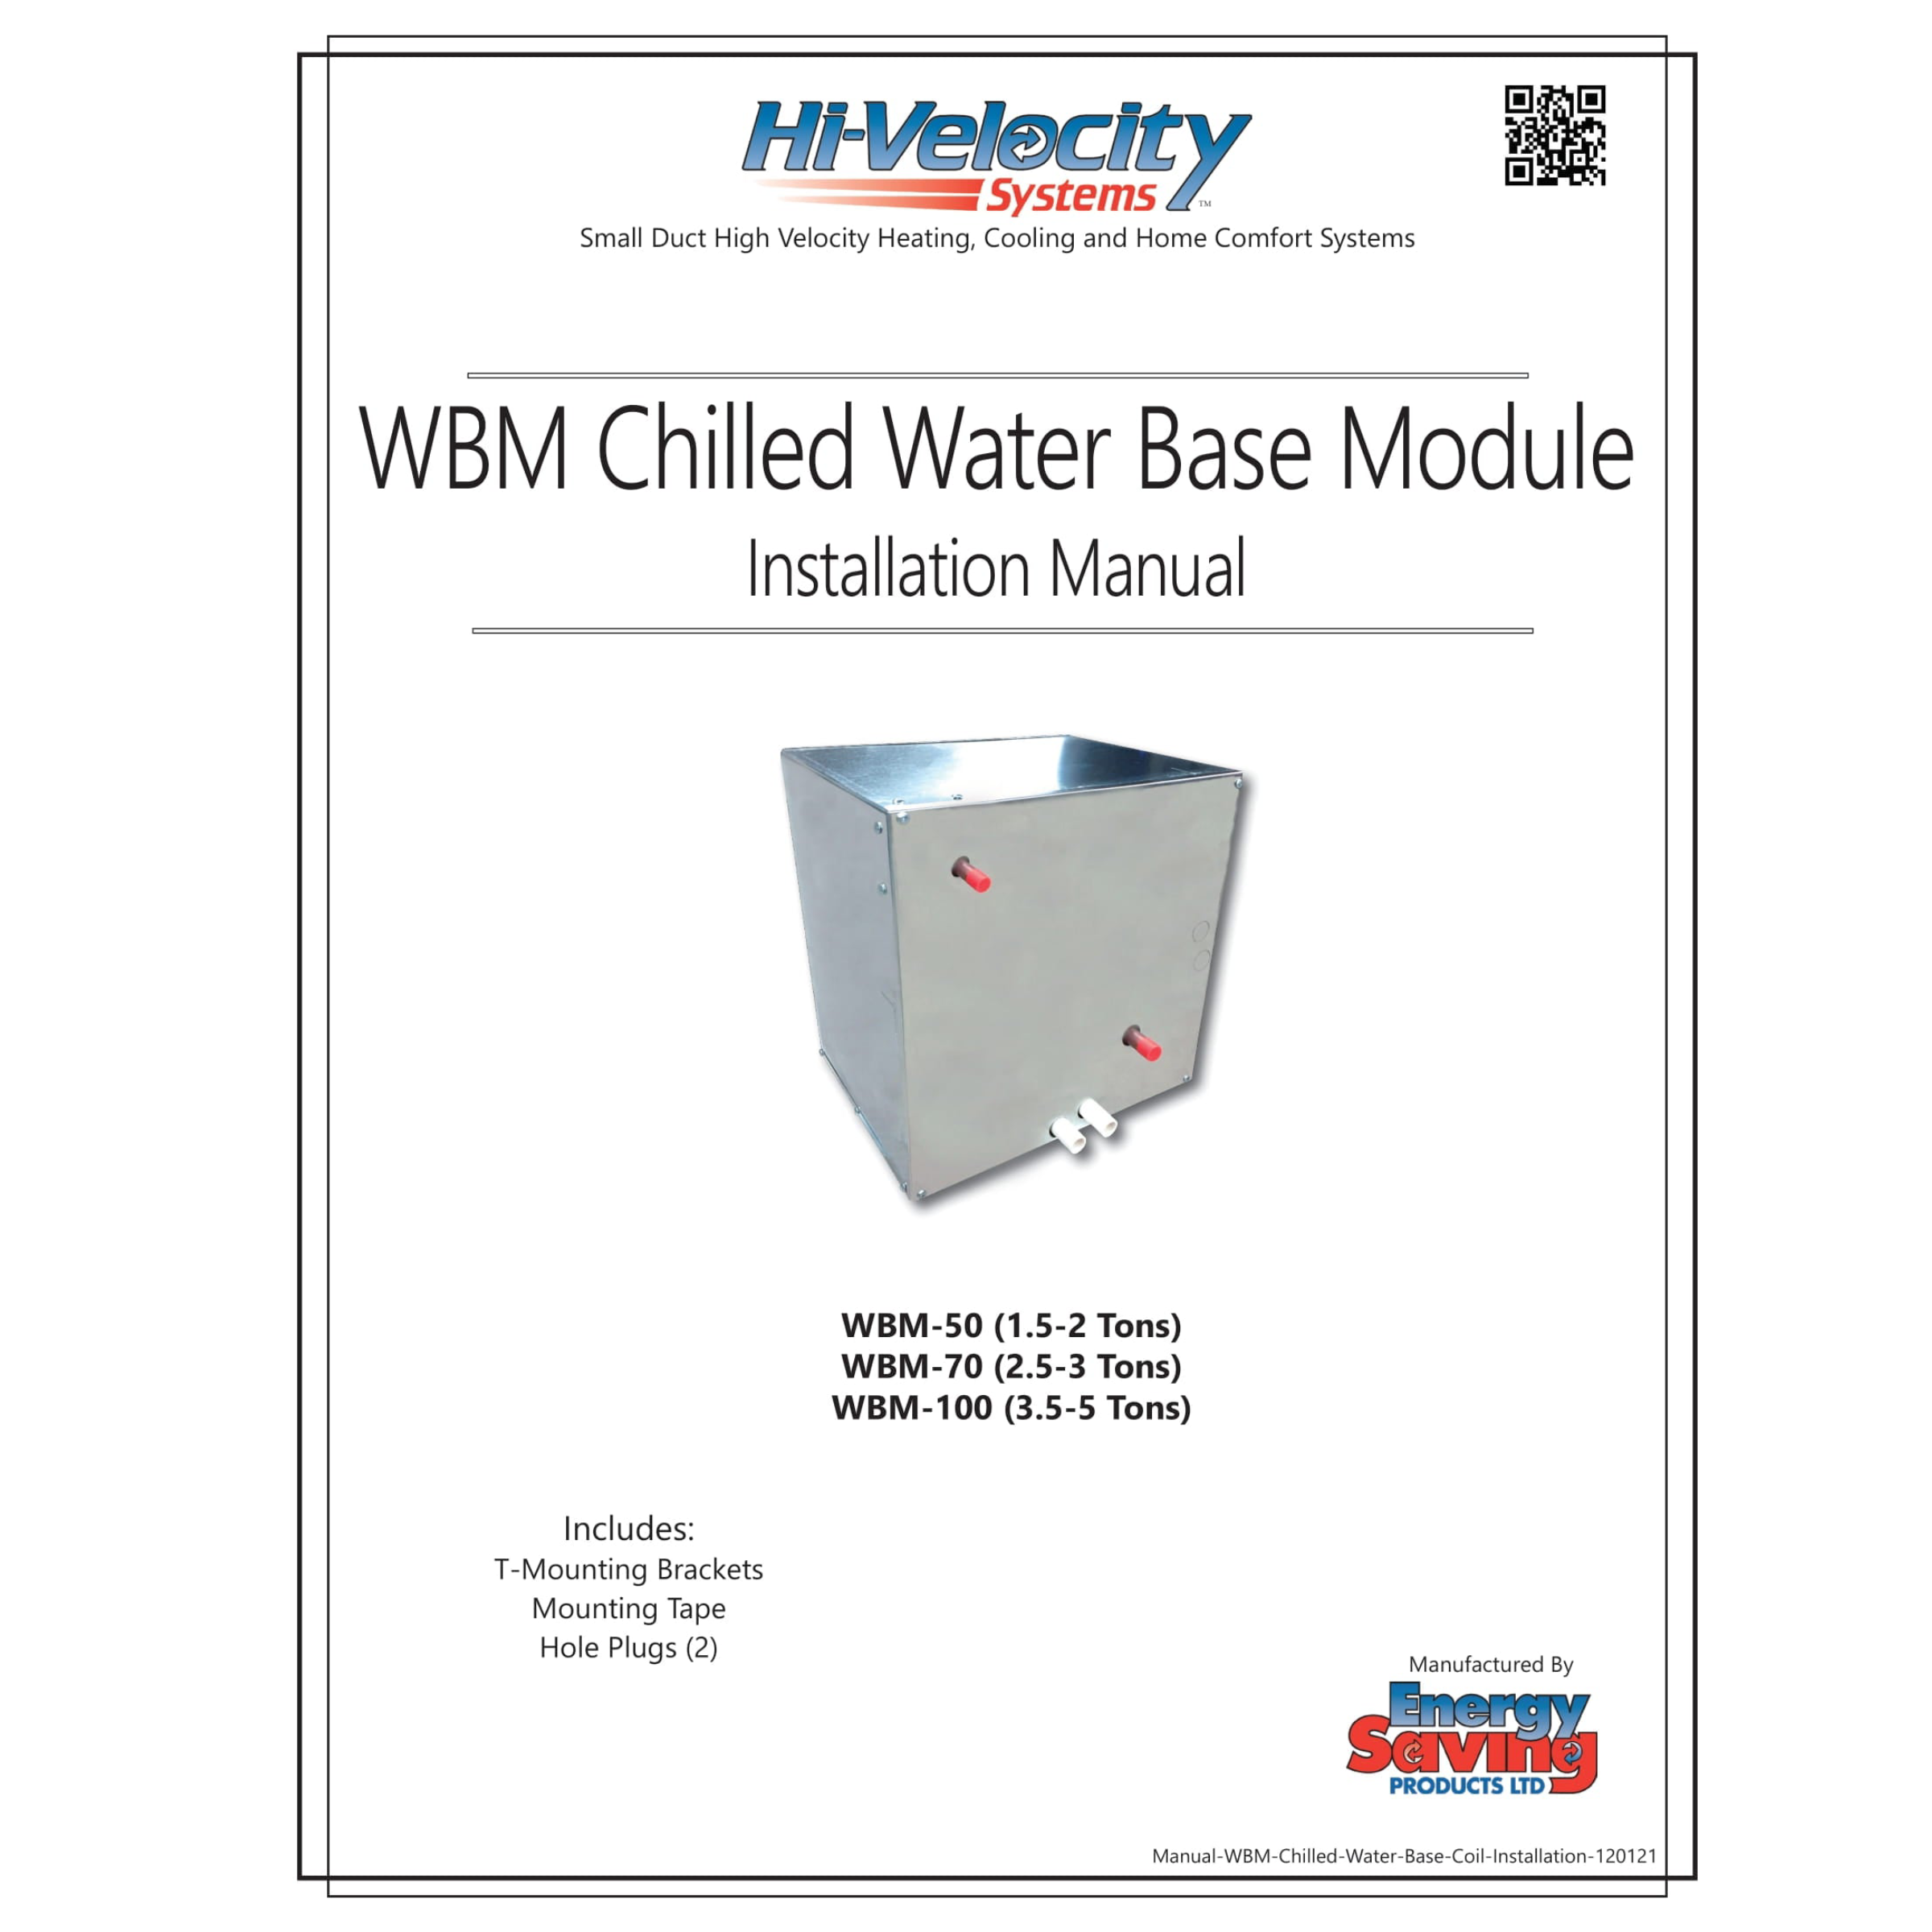 Hi-Velocity WBM Series Hydronic Water Coil Base Modules 1.5 to 5 Tons, 18,000 to 60,000 BTU, R-410A